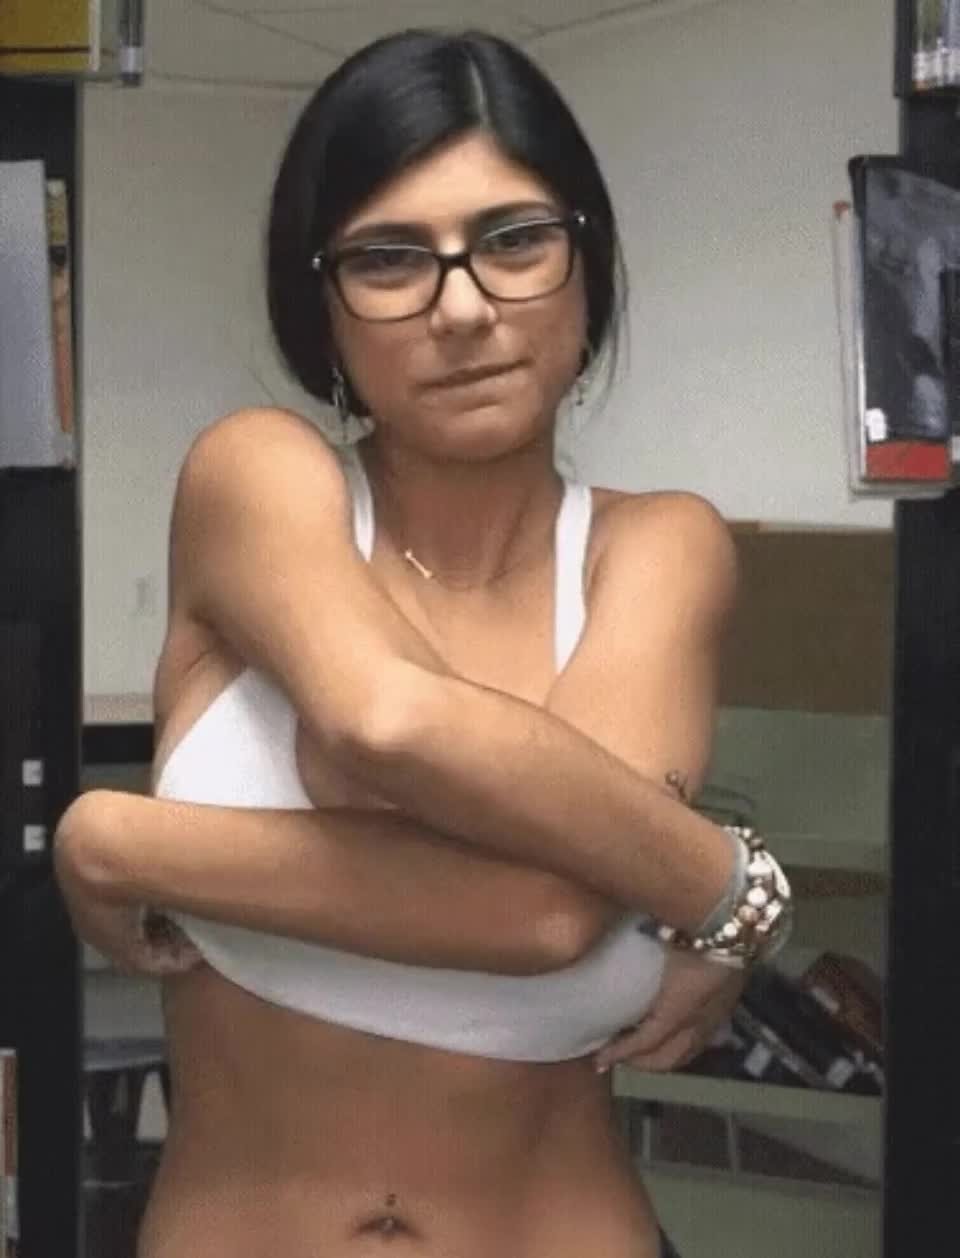 Video by maxis735 with the username @maxis735,  February 18, 2023 at 1:52 AM. The post is about the topic Mia Khalifa and the text says '#bigboobs #bigtits #busty #bigass #pov #milf #beauty #amateur #naturalboobs #onoff #beforeafter #dressedundressed #anal #lesbian'